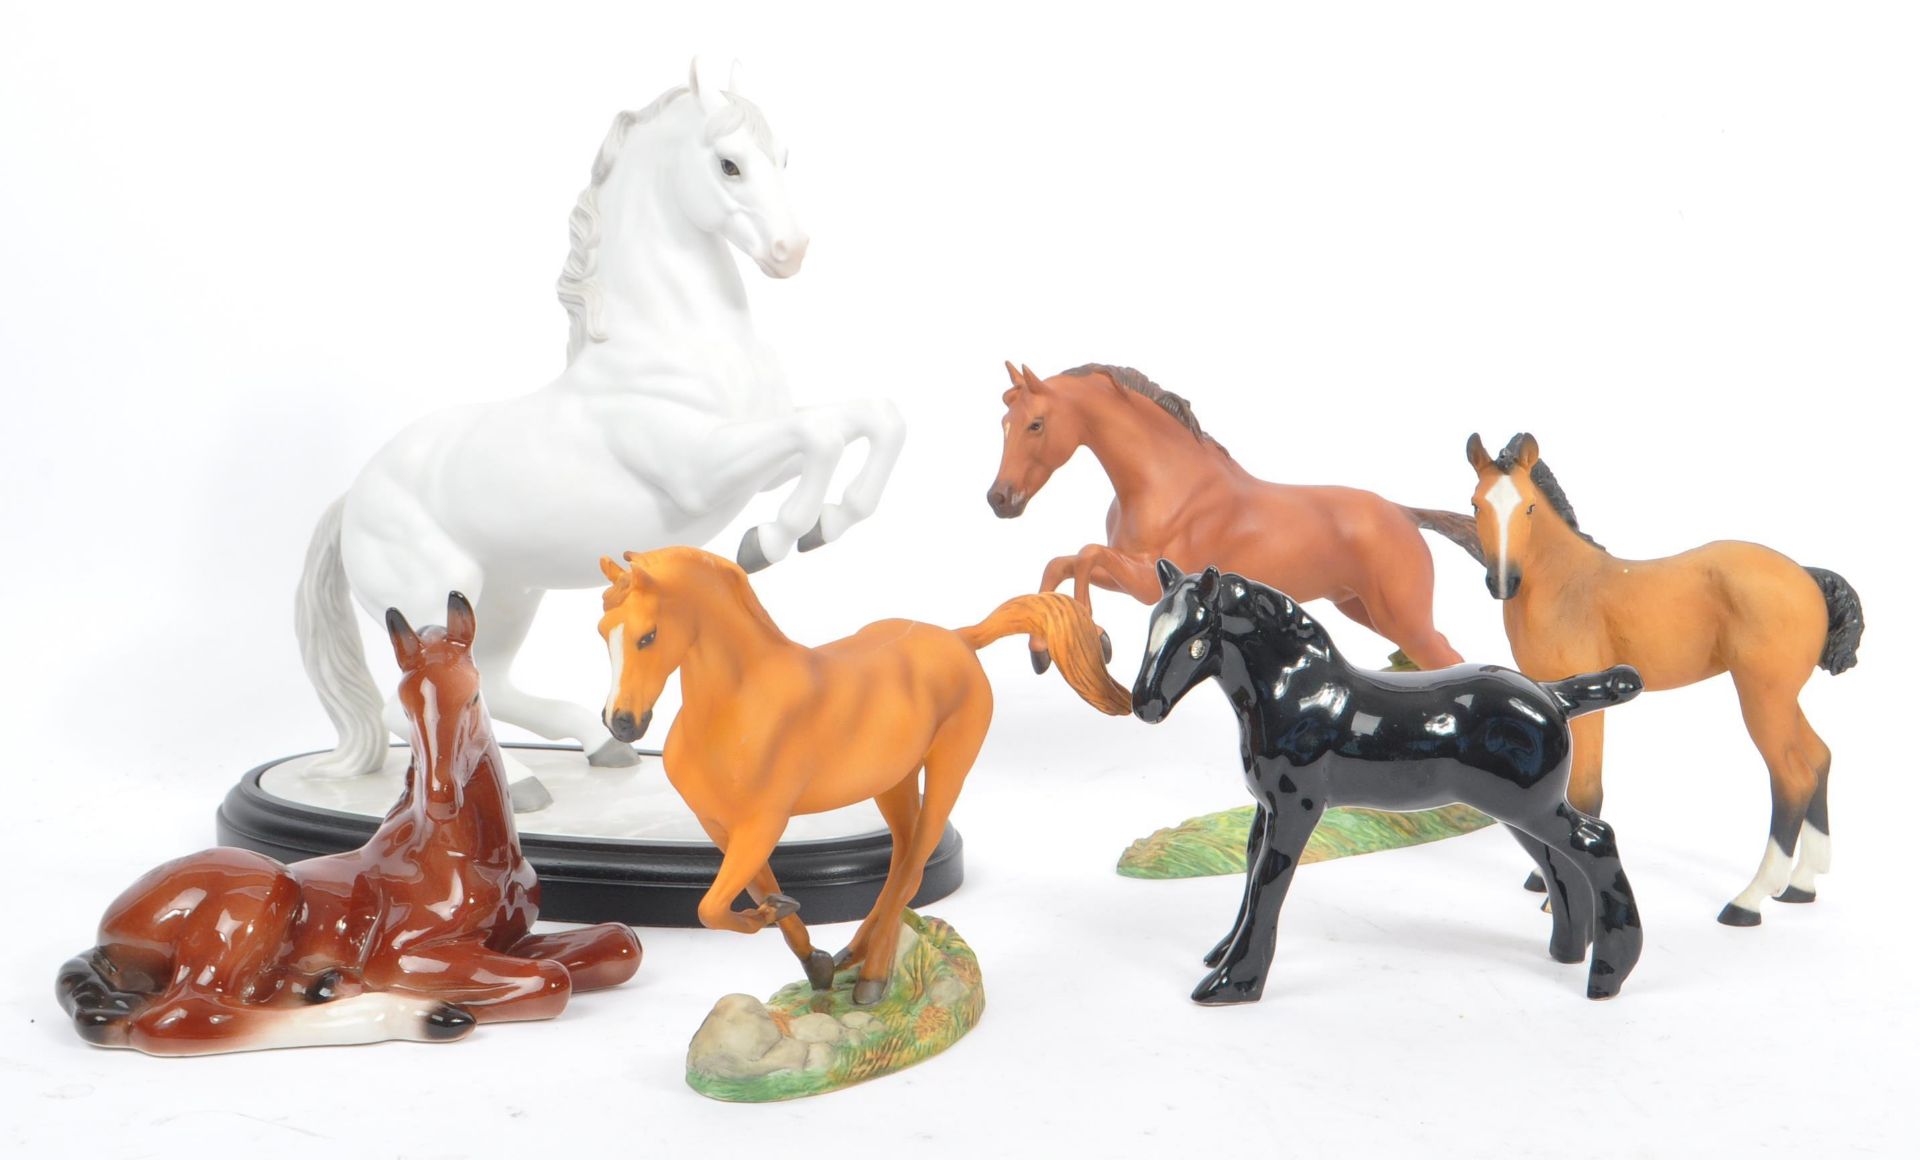 COLLECTION OF CONTEMPORARY PORCELAIN HORSE FIGURINES